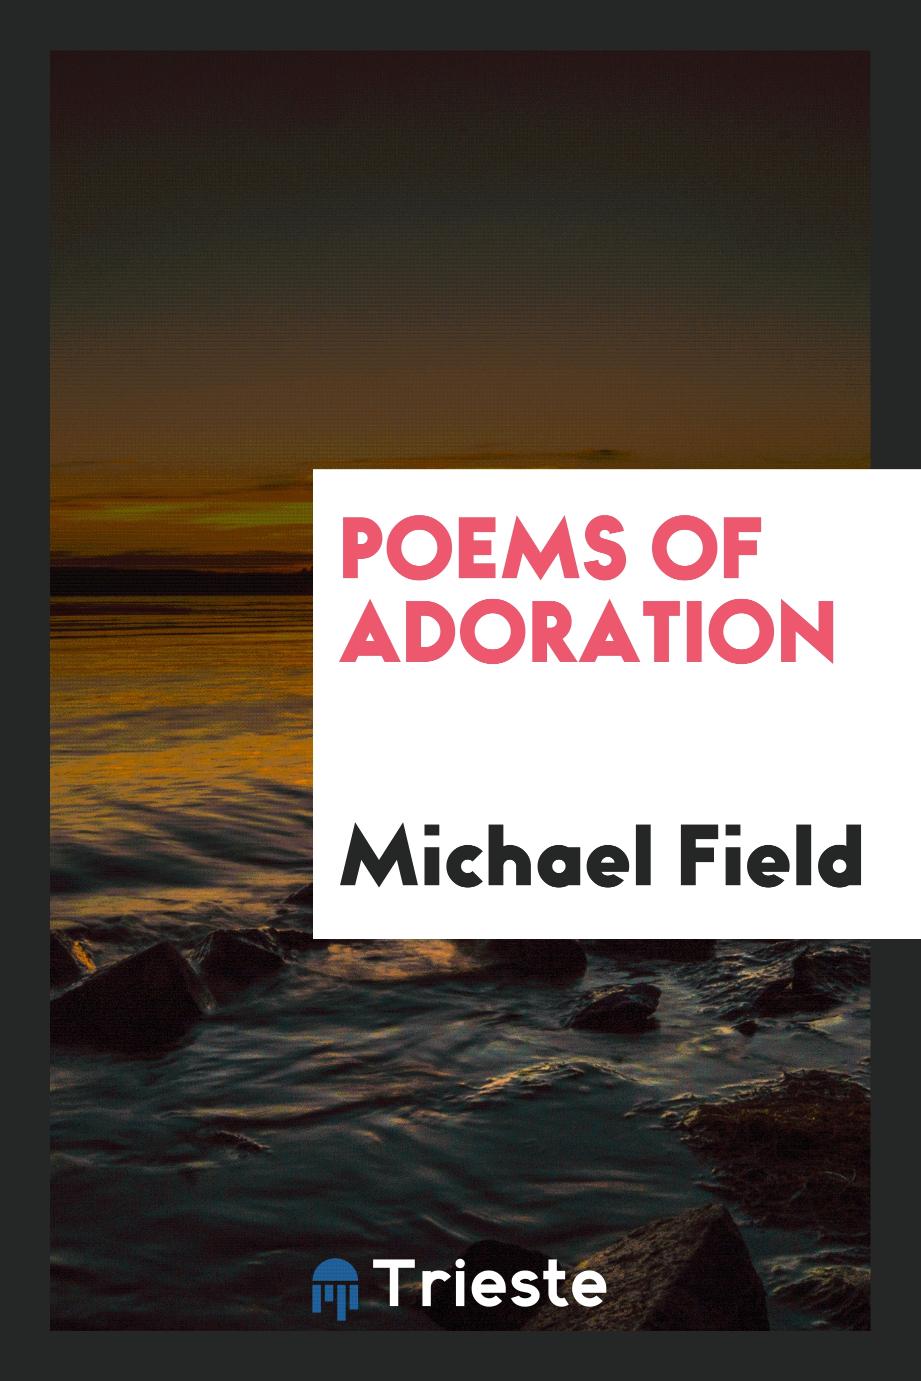 Michael Field - Poems of adoration